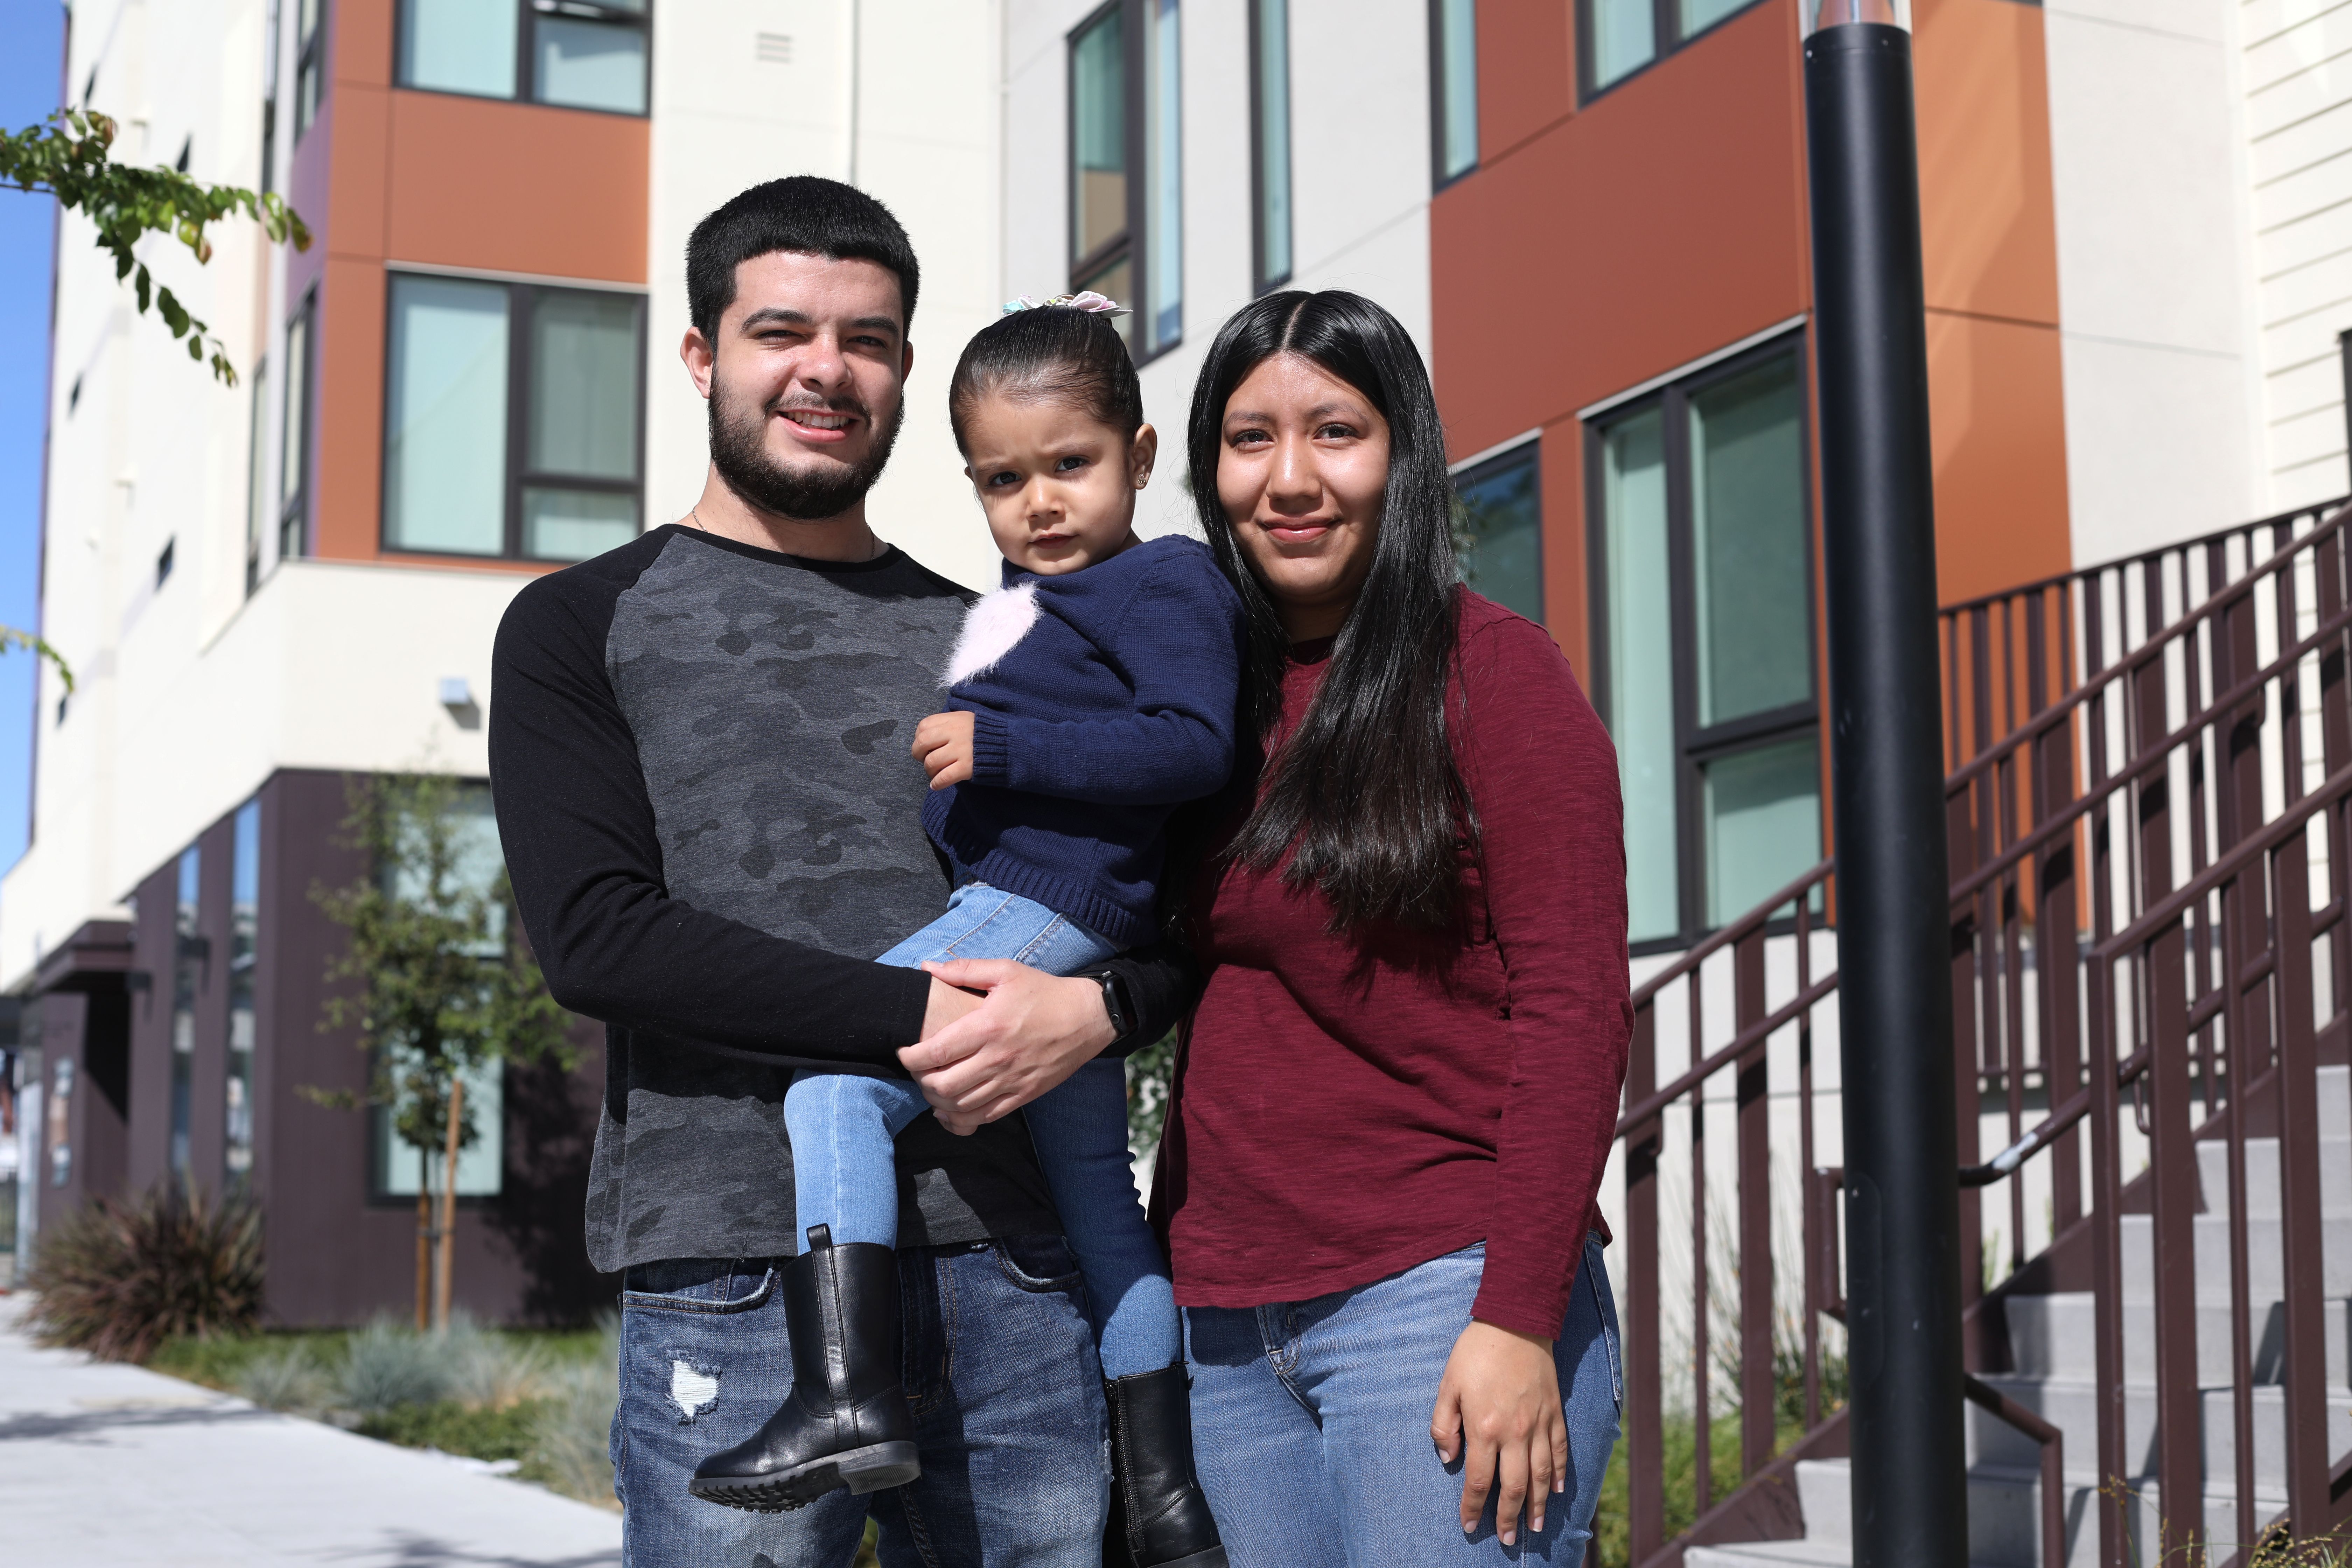 Jesus Barragan and his family photographed outside their apartment building in Oakland